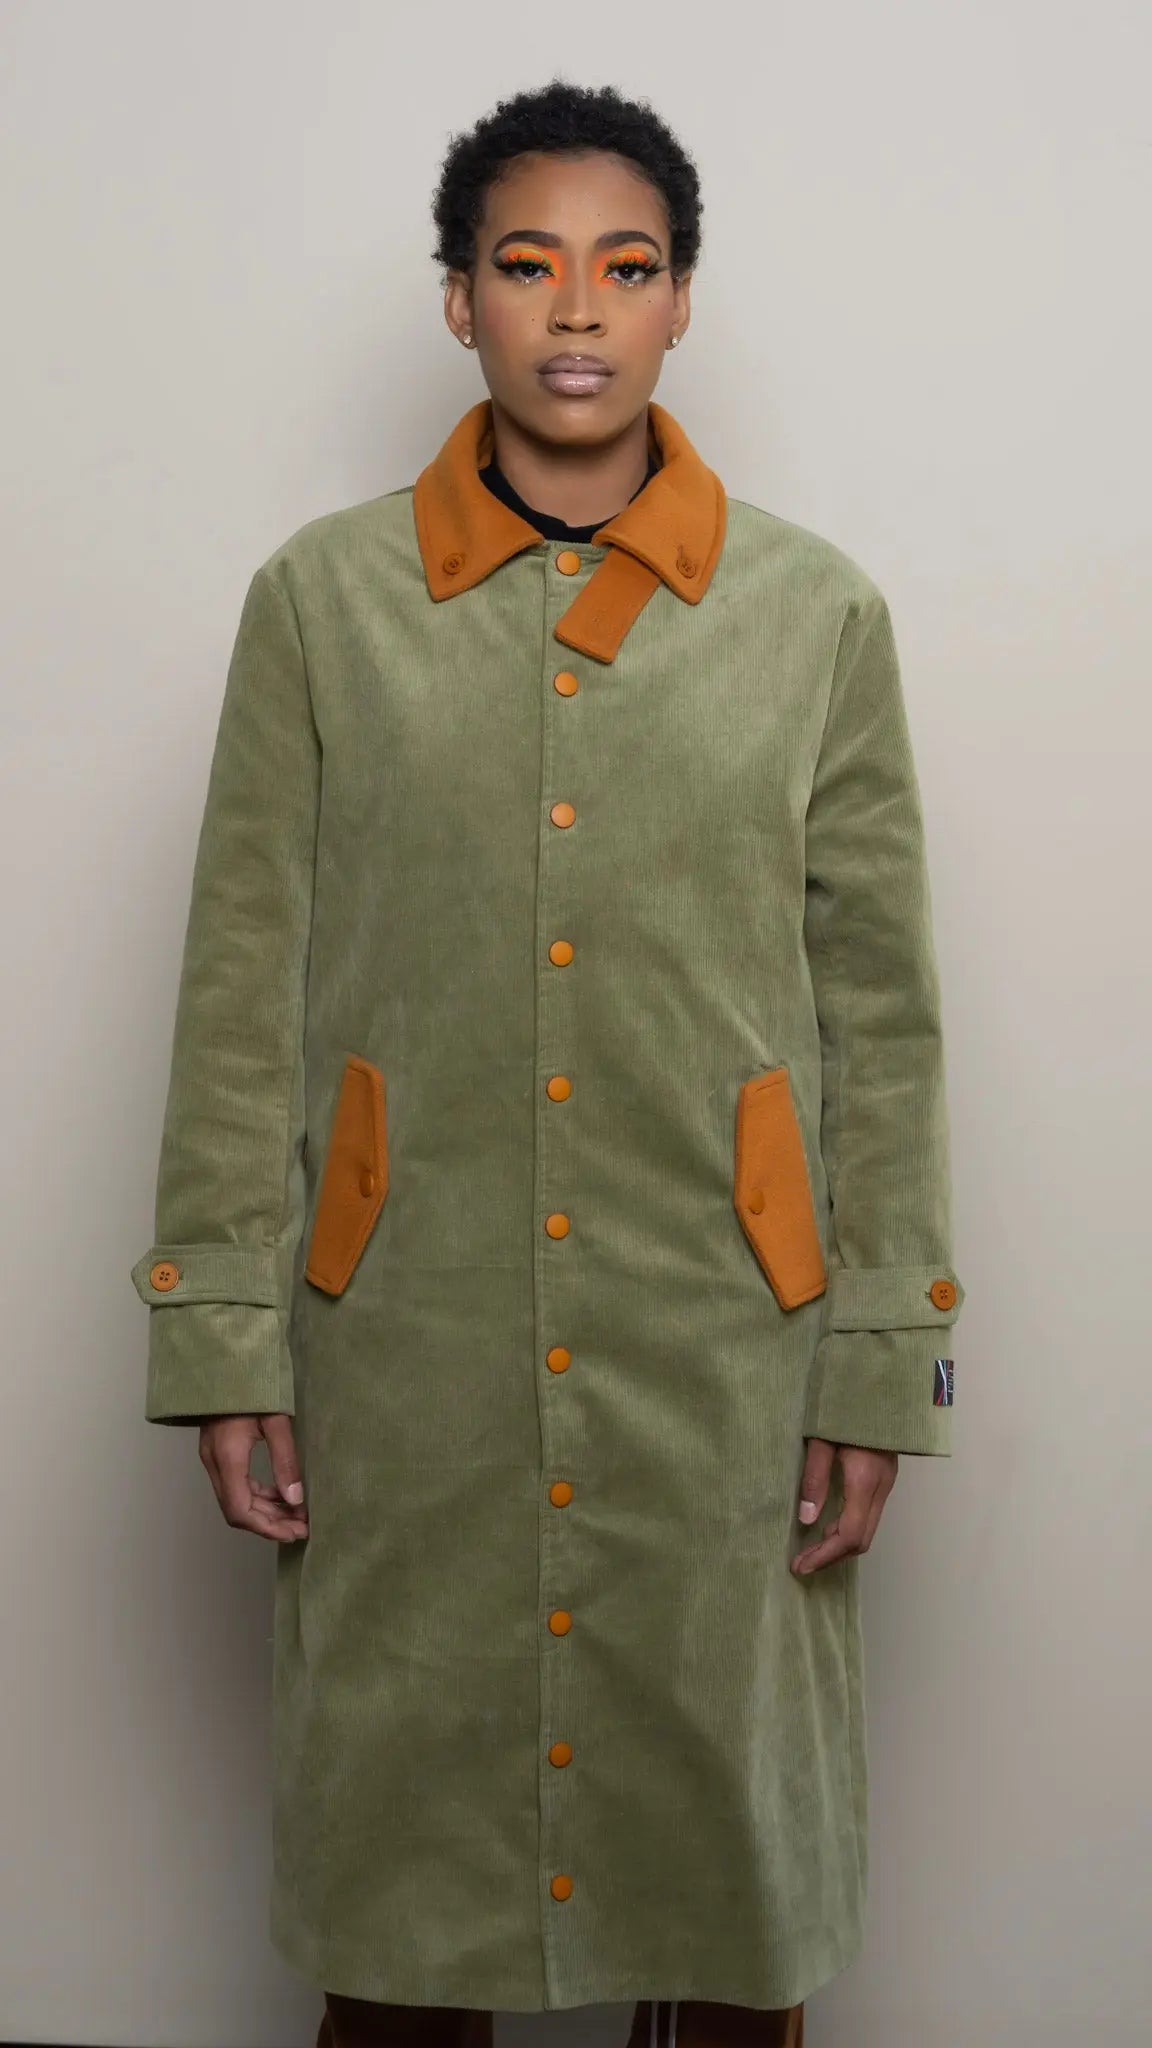 Photo of model in the Arius Juan Olive Green Earthly Trench Coat posing for product picture.